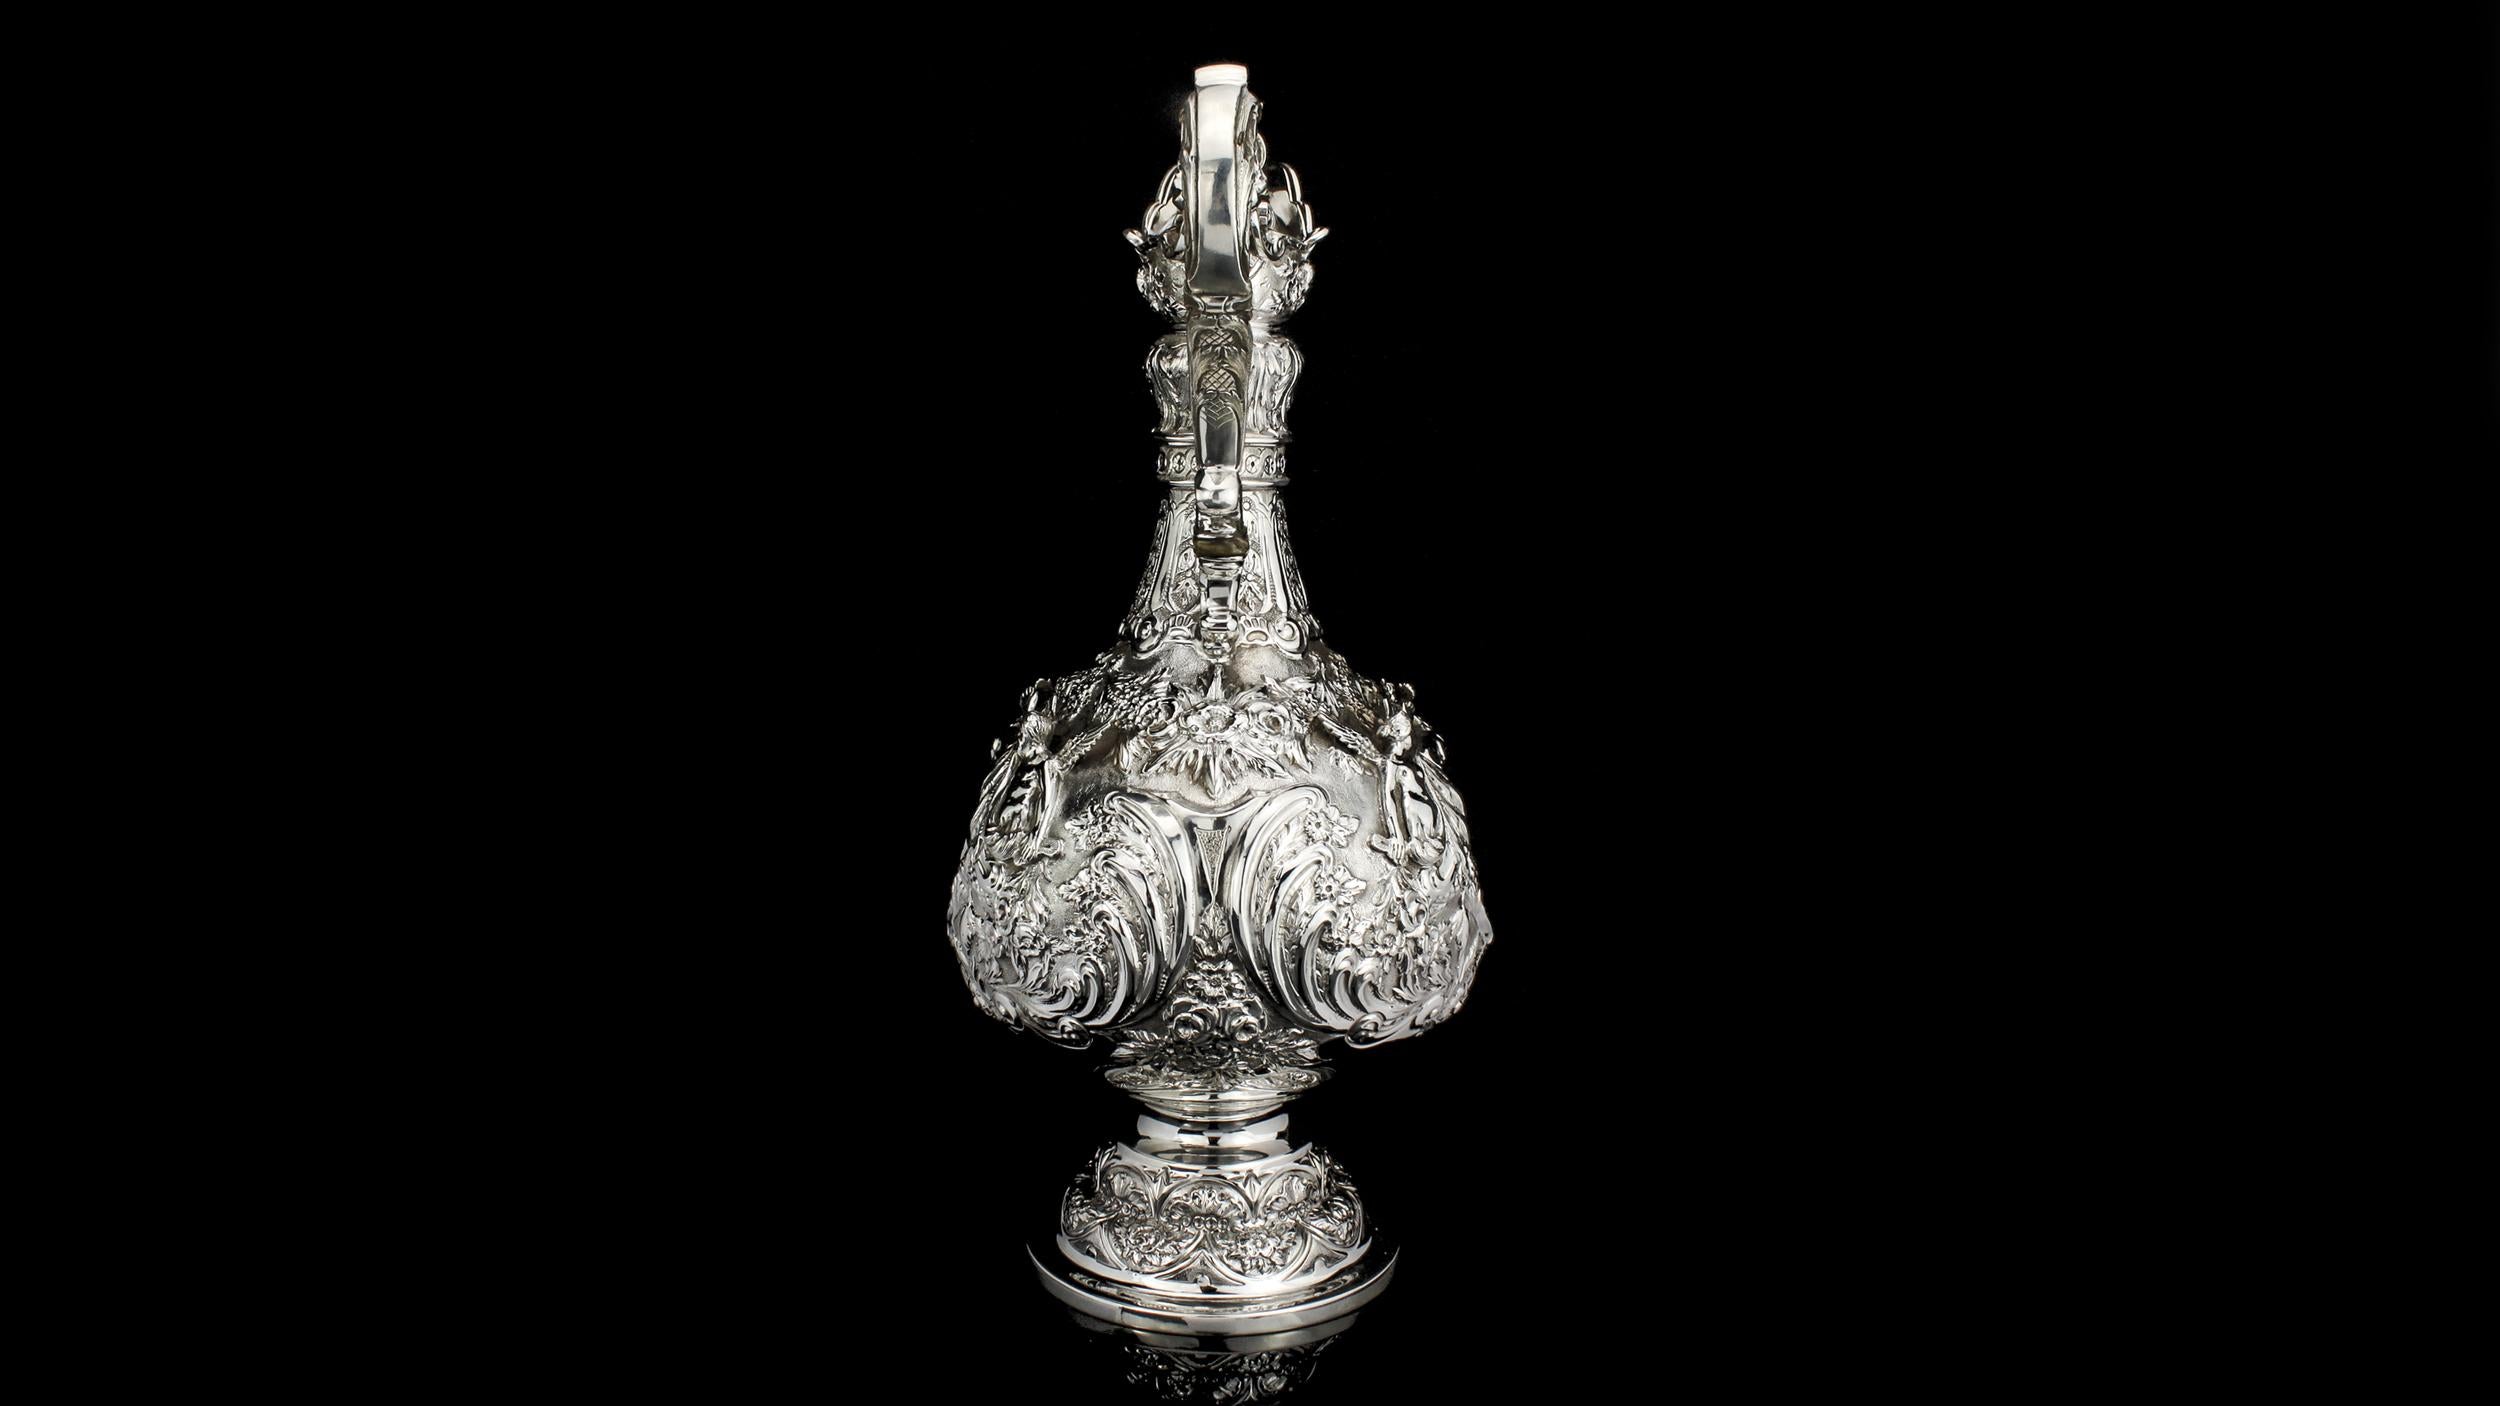 Antique sterling silver elaborately engraved armada jug
Maker: Martin Hall & Co
Made in Sheffield 1905
Fully hallmark.

Has engraved Virtutis gloria merces (Glory is the reward of valour)

Dimensions - 
Height 36.5 cm
Width 18 cm
Weight